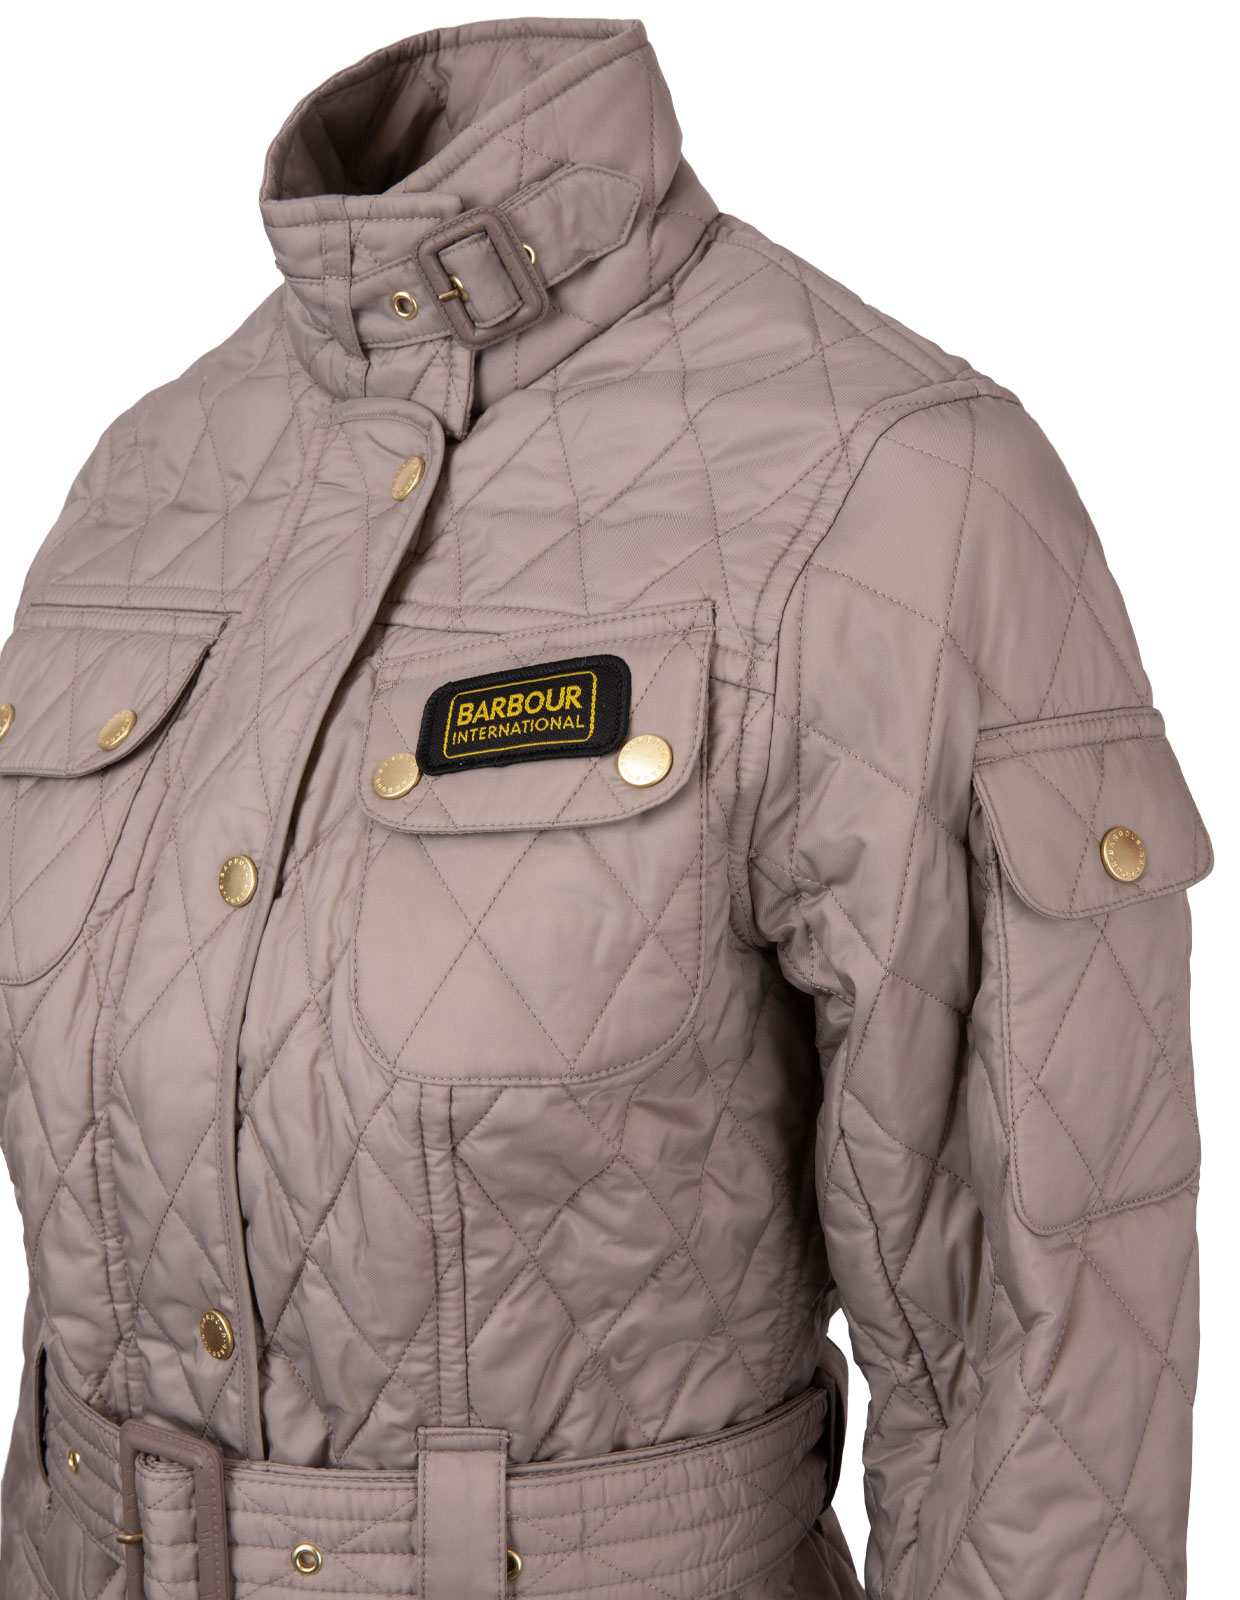 Barbour International Quilted Jacket Taupe/Pearl Stl 6